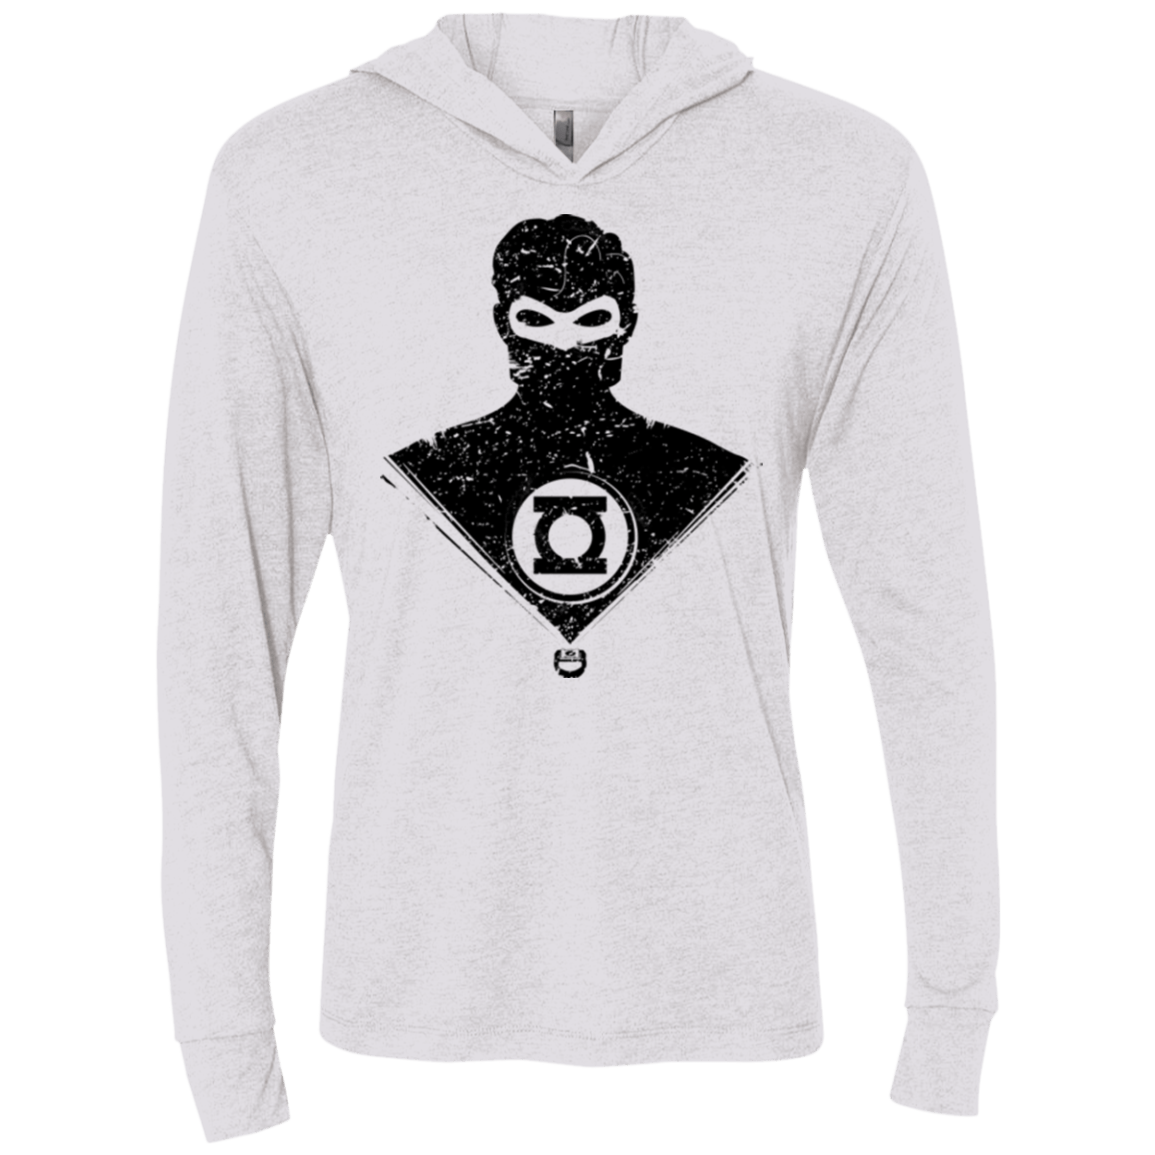 T-Shirts Heather White / X-Small Ring Shadow Triblend Long Sleeve Hoodie Tee